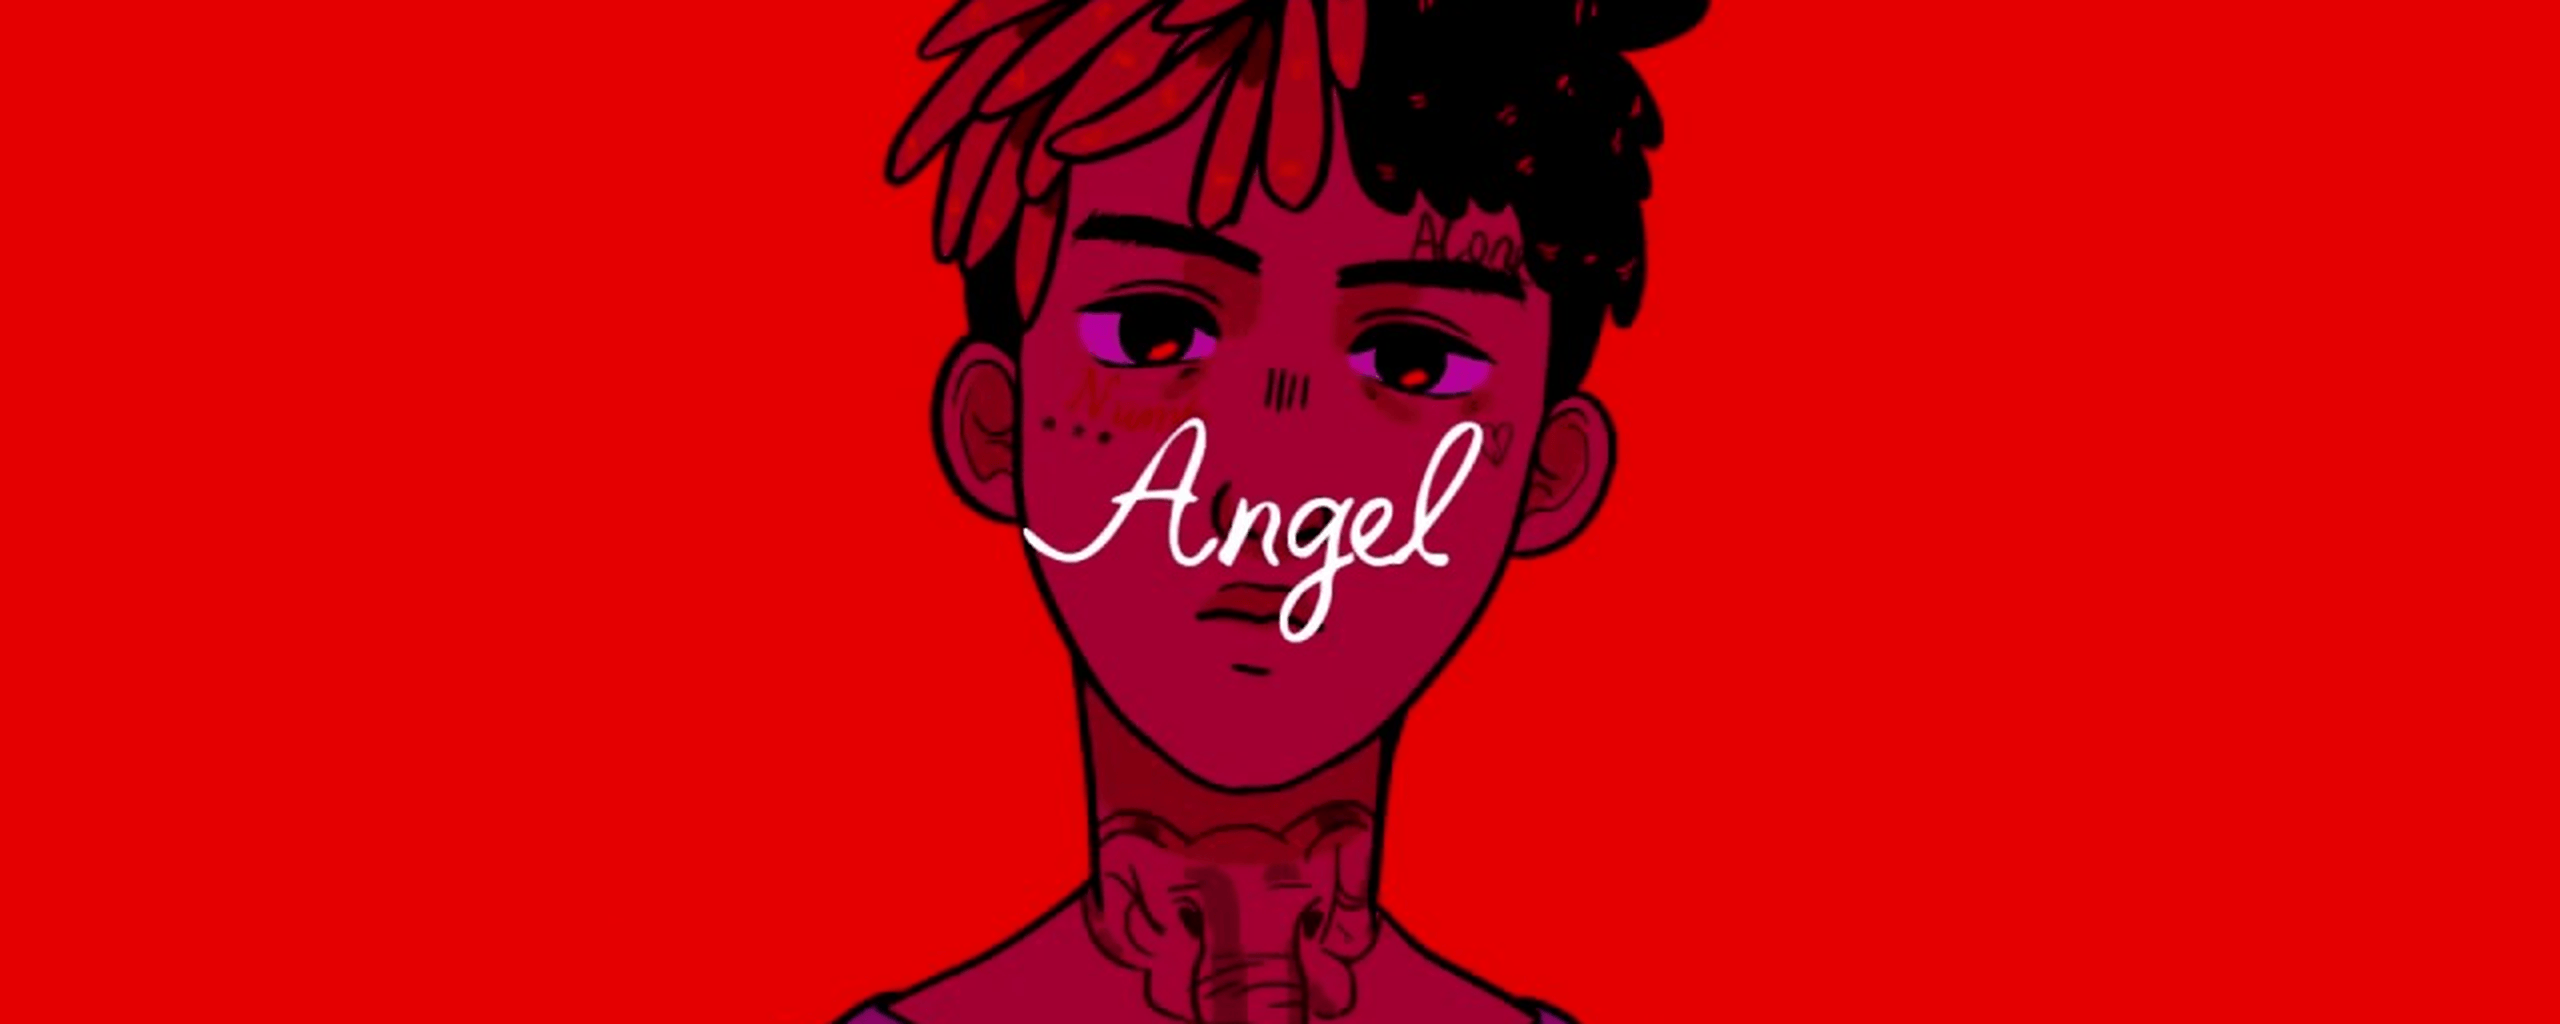 Download Angel XXXtentation, RIP for Dual Monitor Resolution